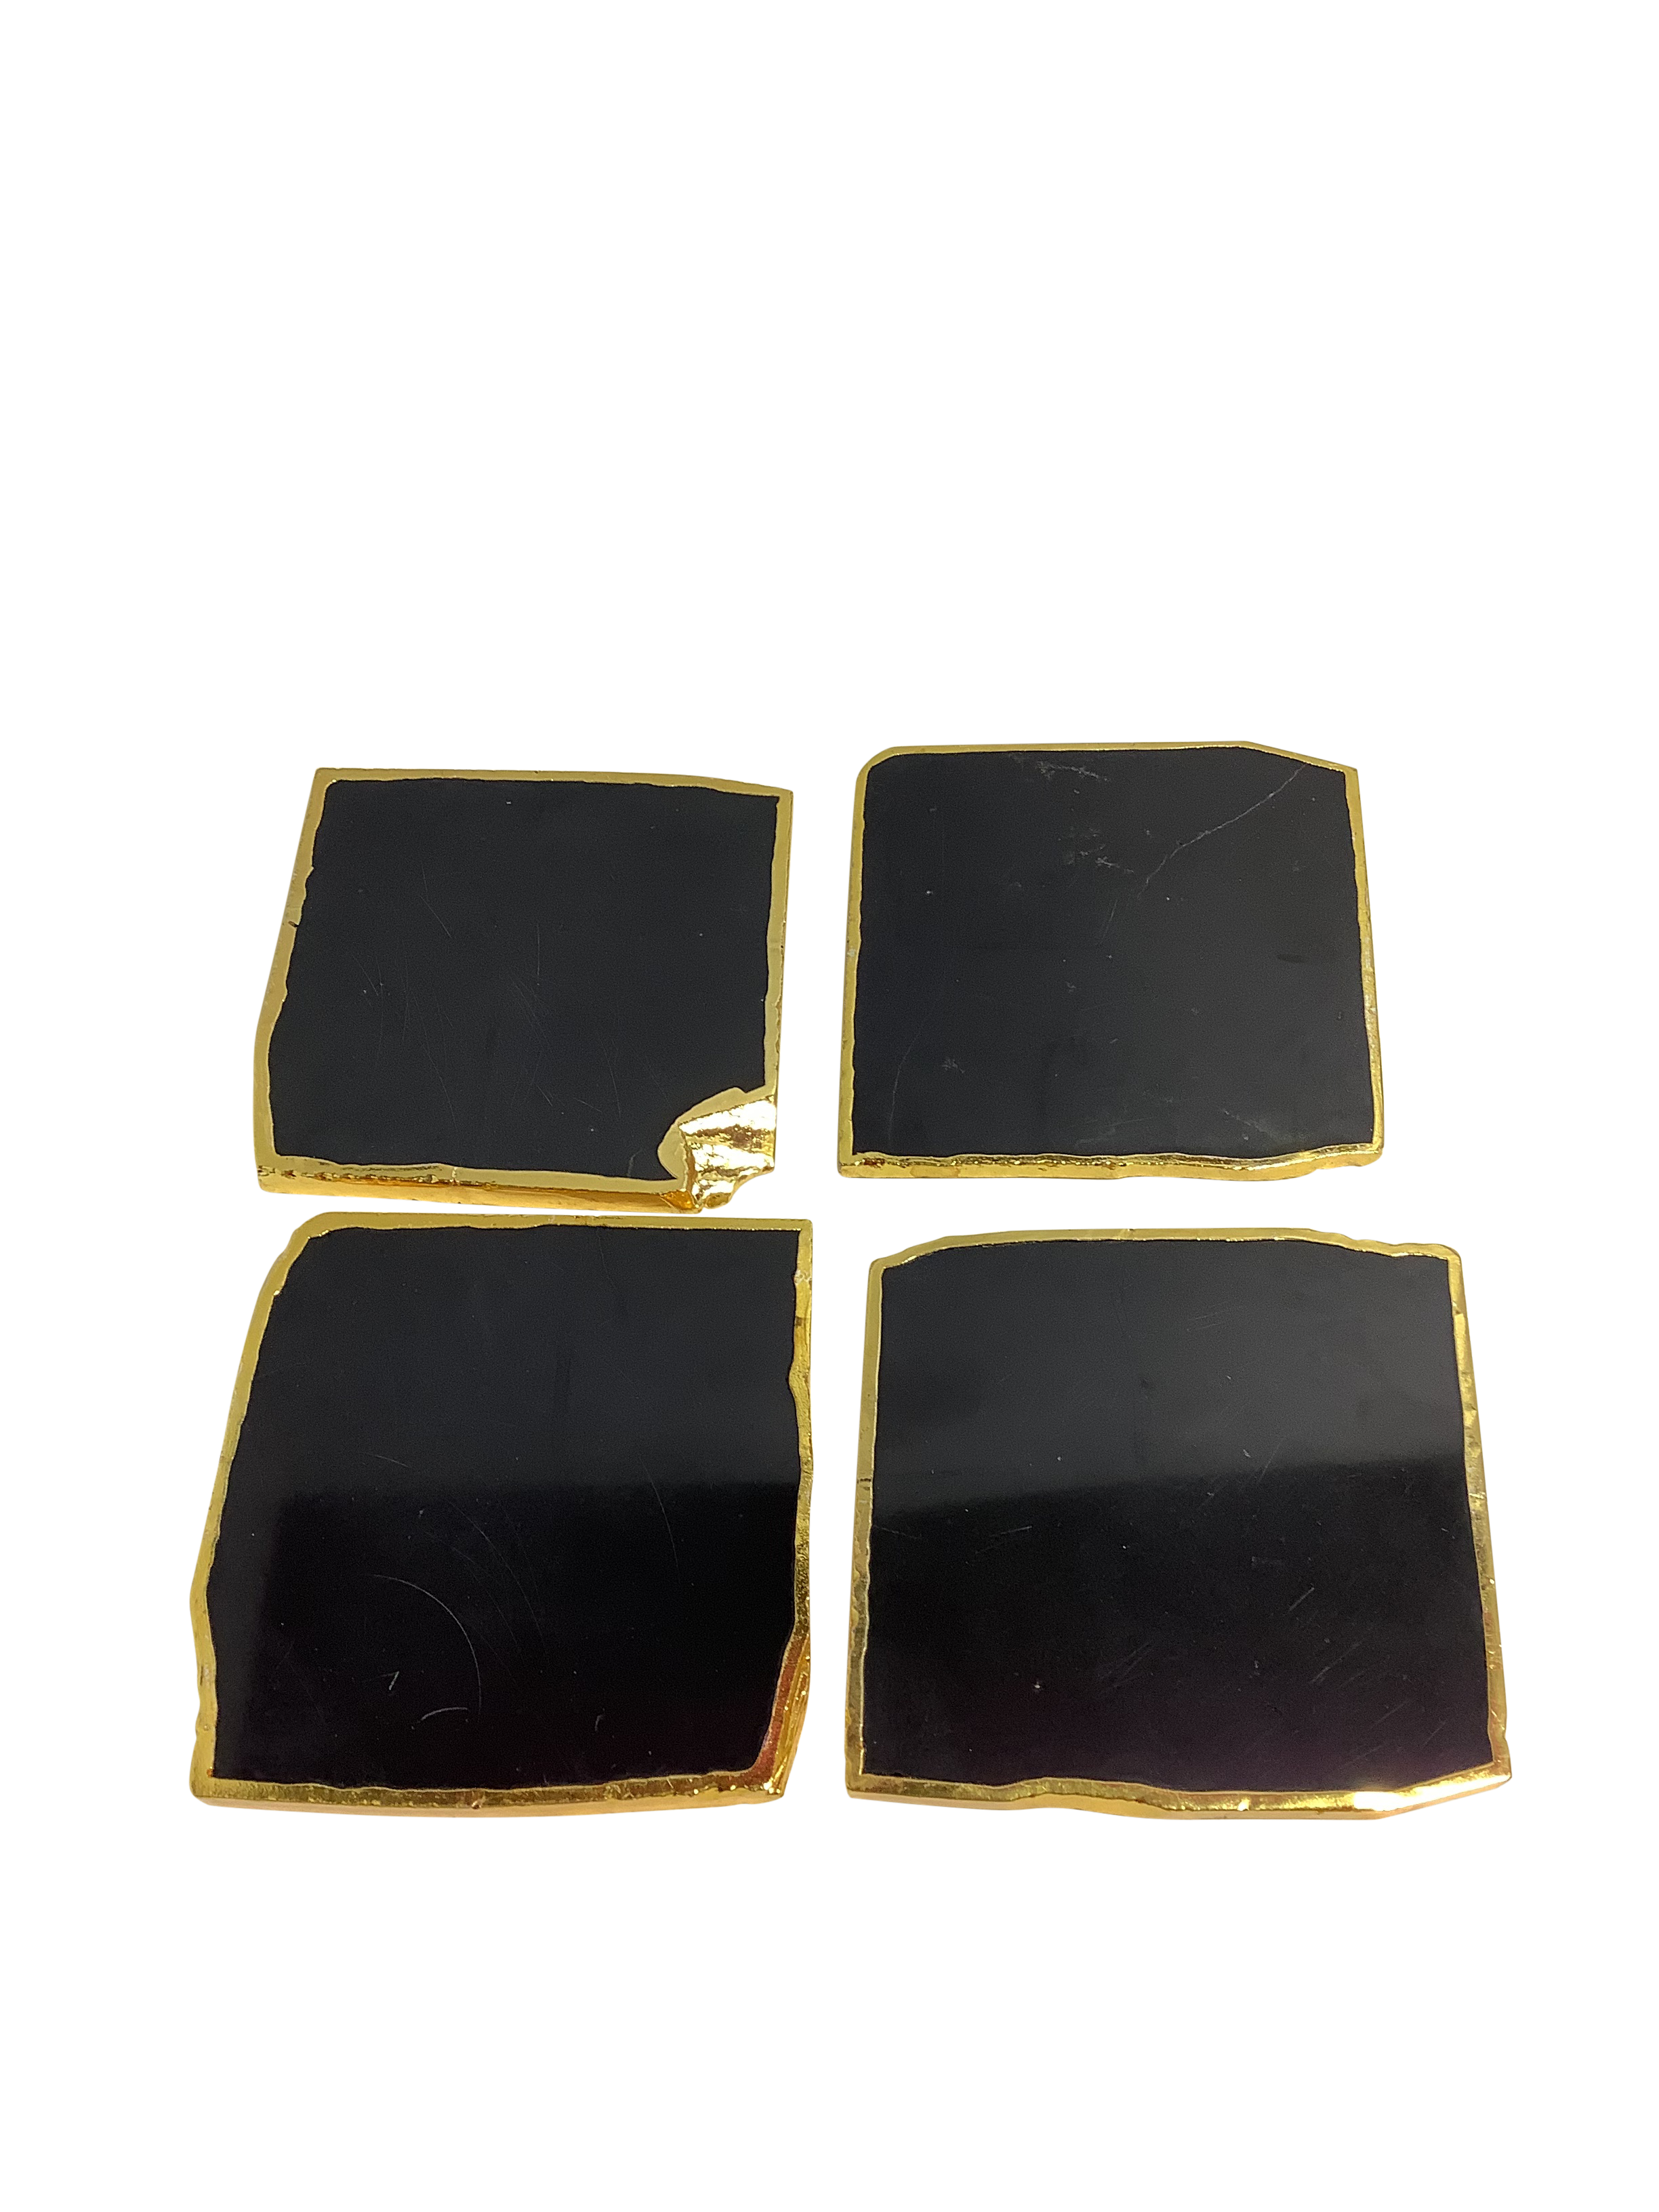 Black Agate Crystal Coaster Square Shaped 2 Pieces Gold